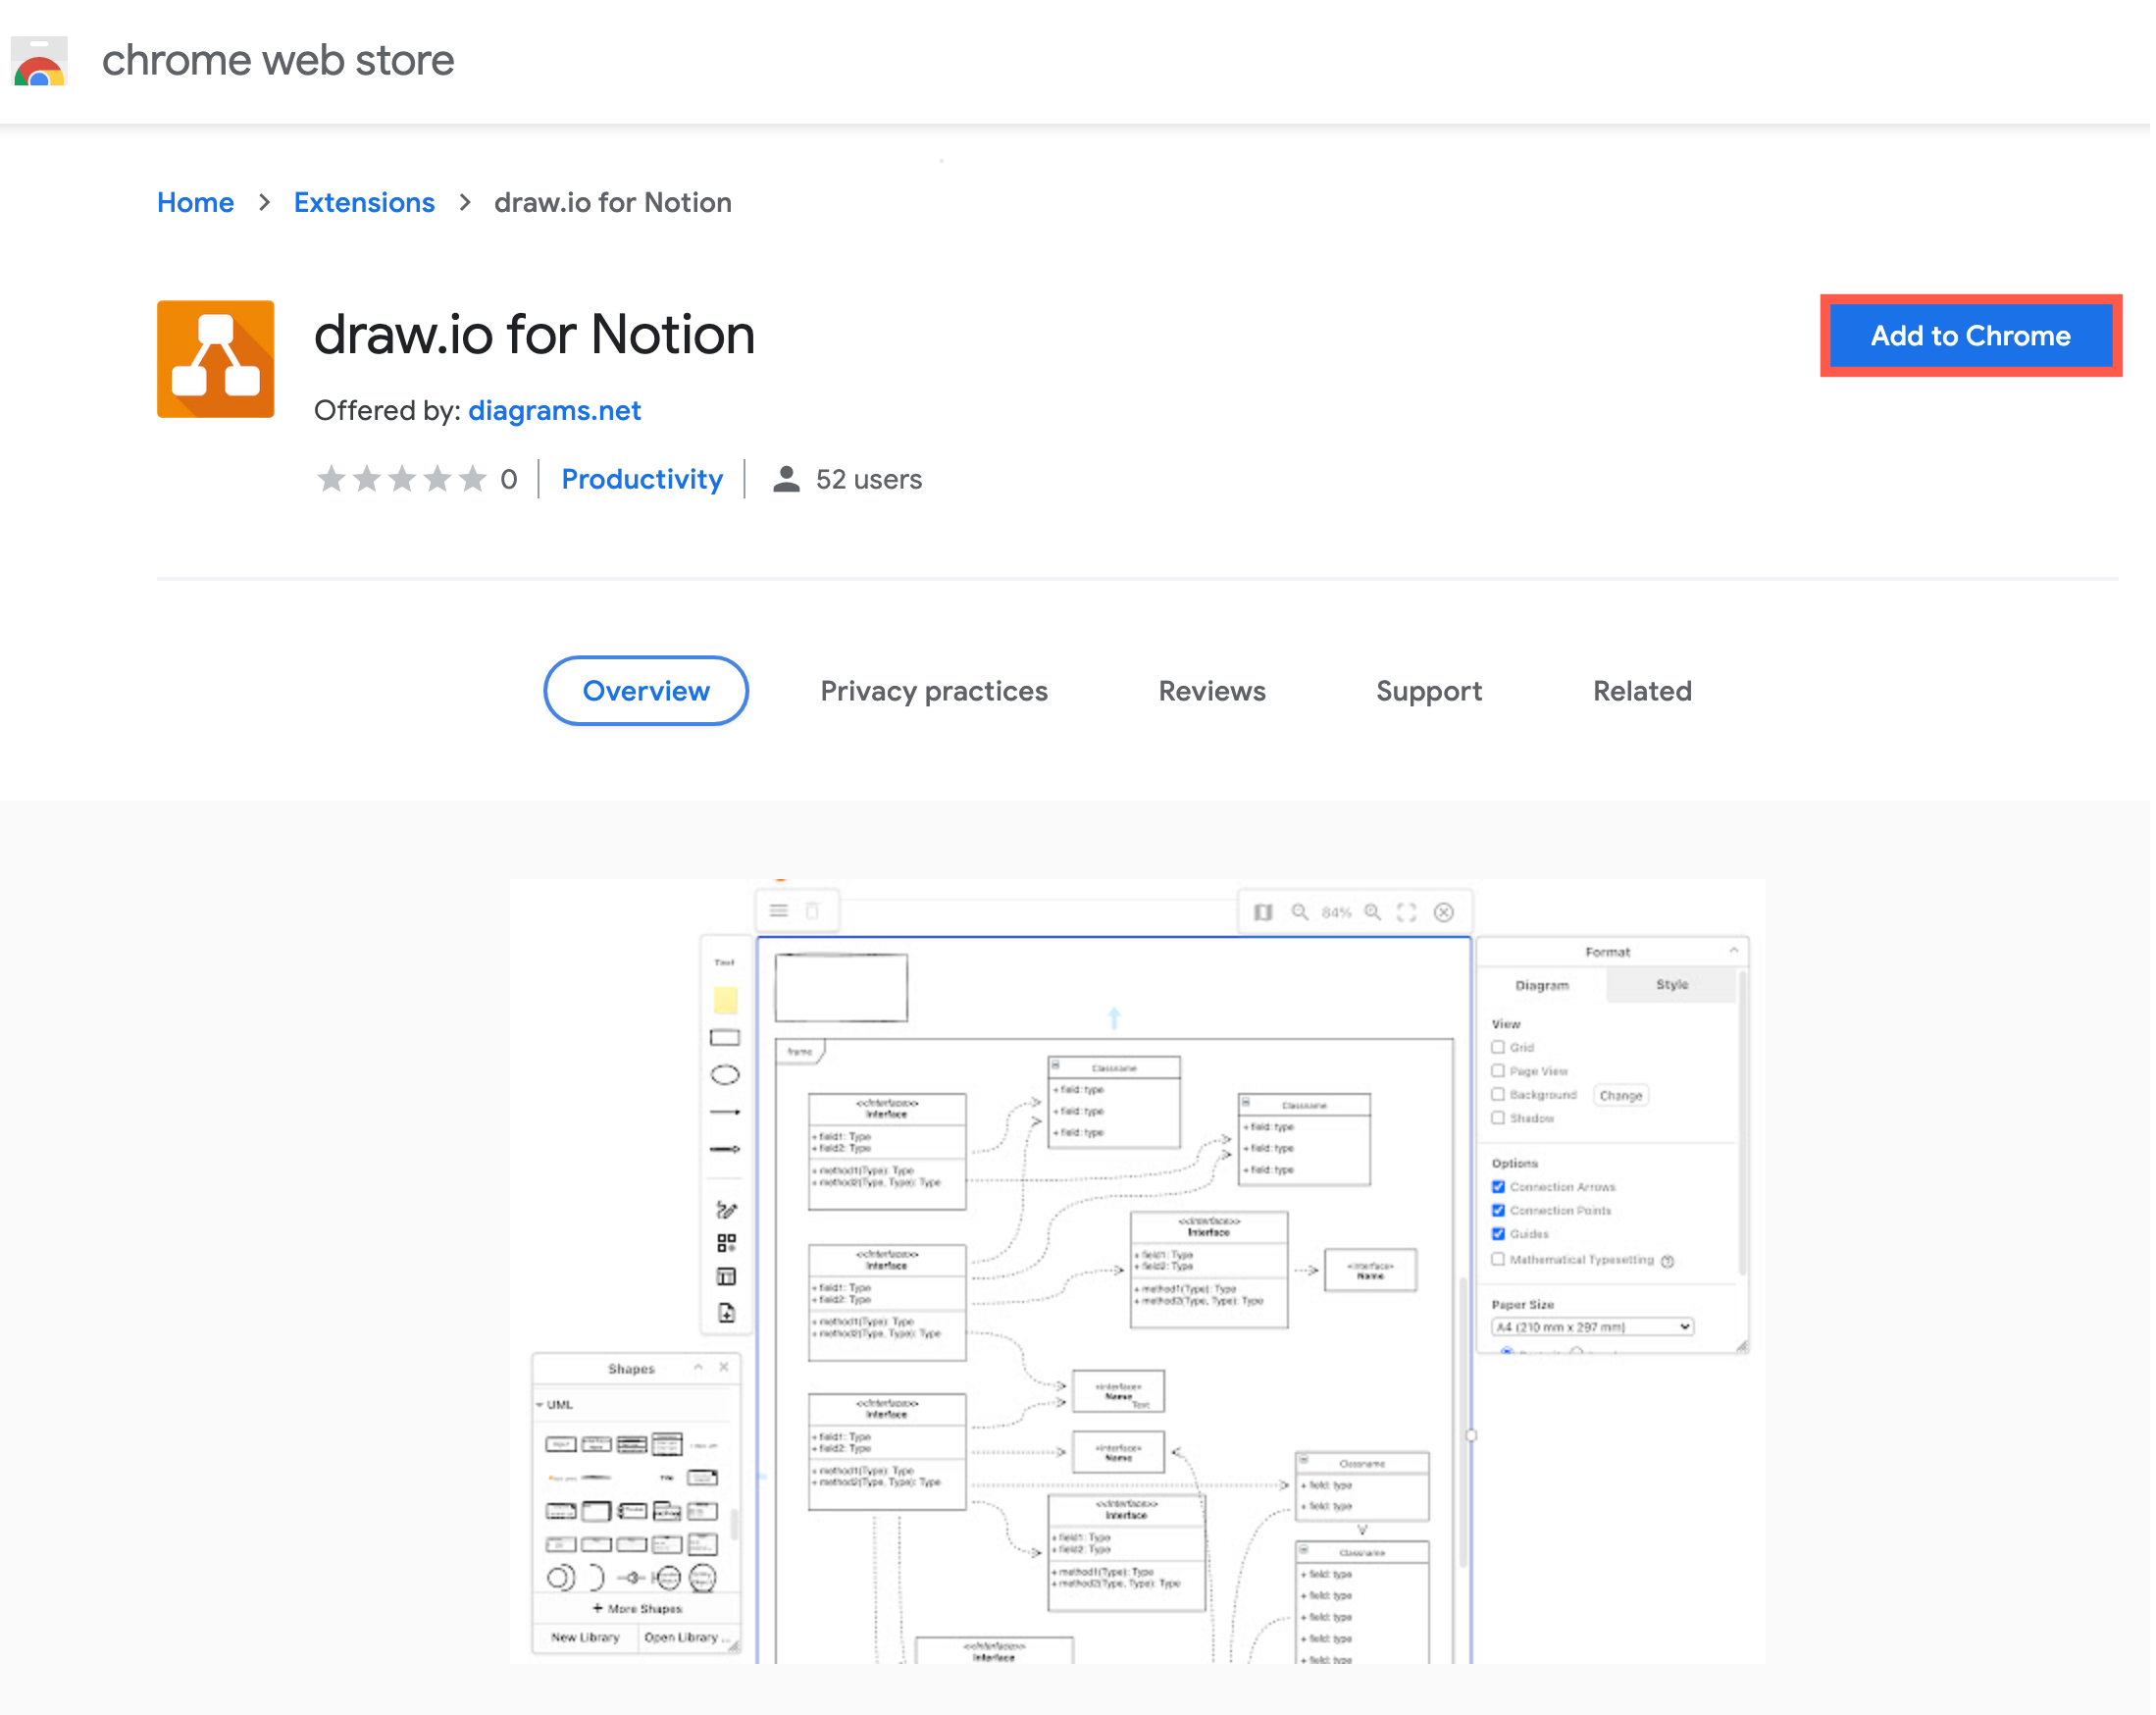 Install the draw.io for Notion Chrome extension from the chrome web store